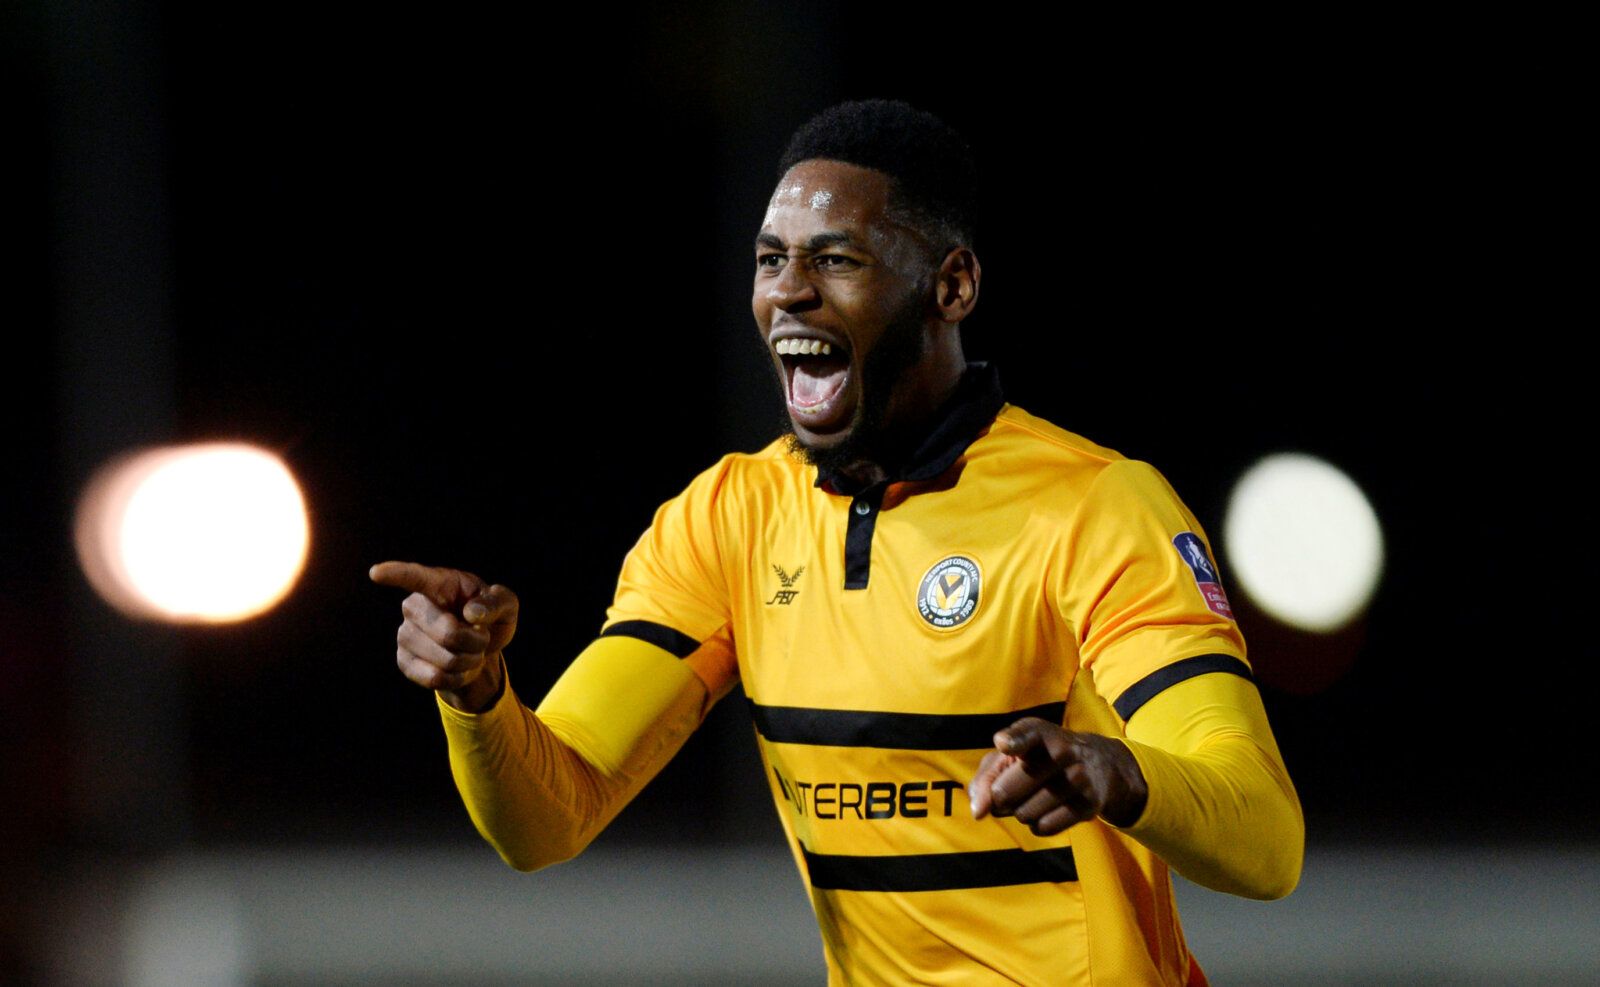 Soccer Football - FA Cup Second Round Replay - Newport County AFC v Wrexham - Rodney Parade, Newport, Britain -December 11, 2018  Newport County's Jamille Matt celebrates scoring their second goal   Action Images/Adam Holt